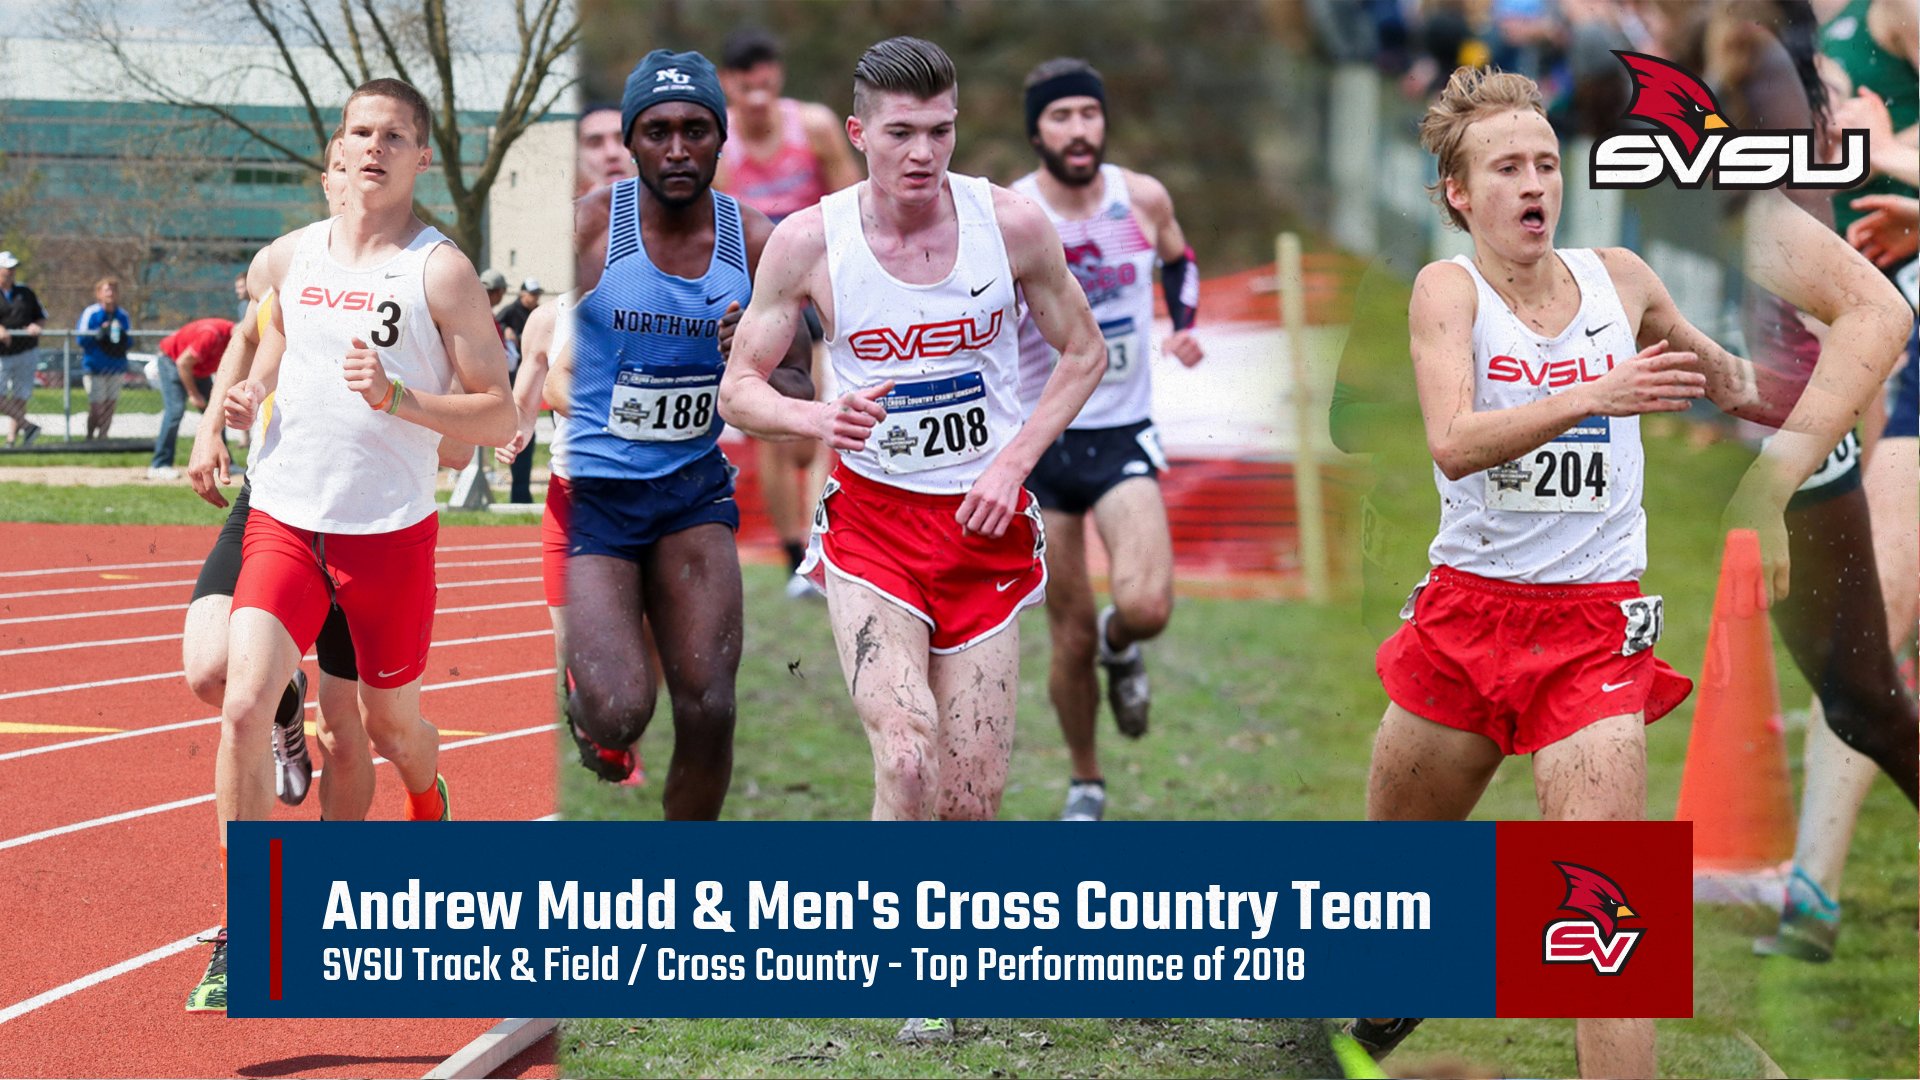 SVSU Track & Field and Cross Country Performances of the Decade - 2018